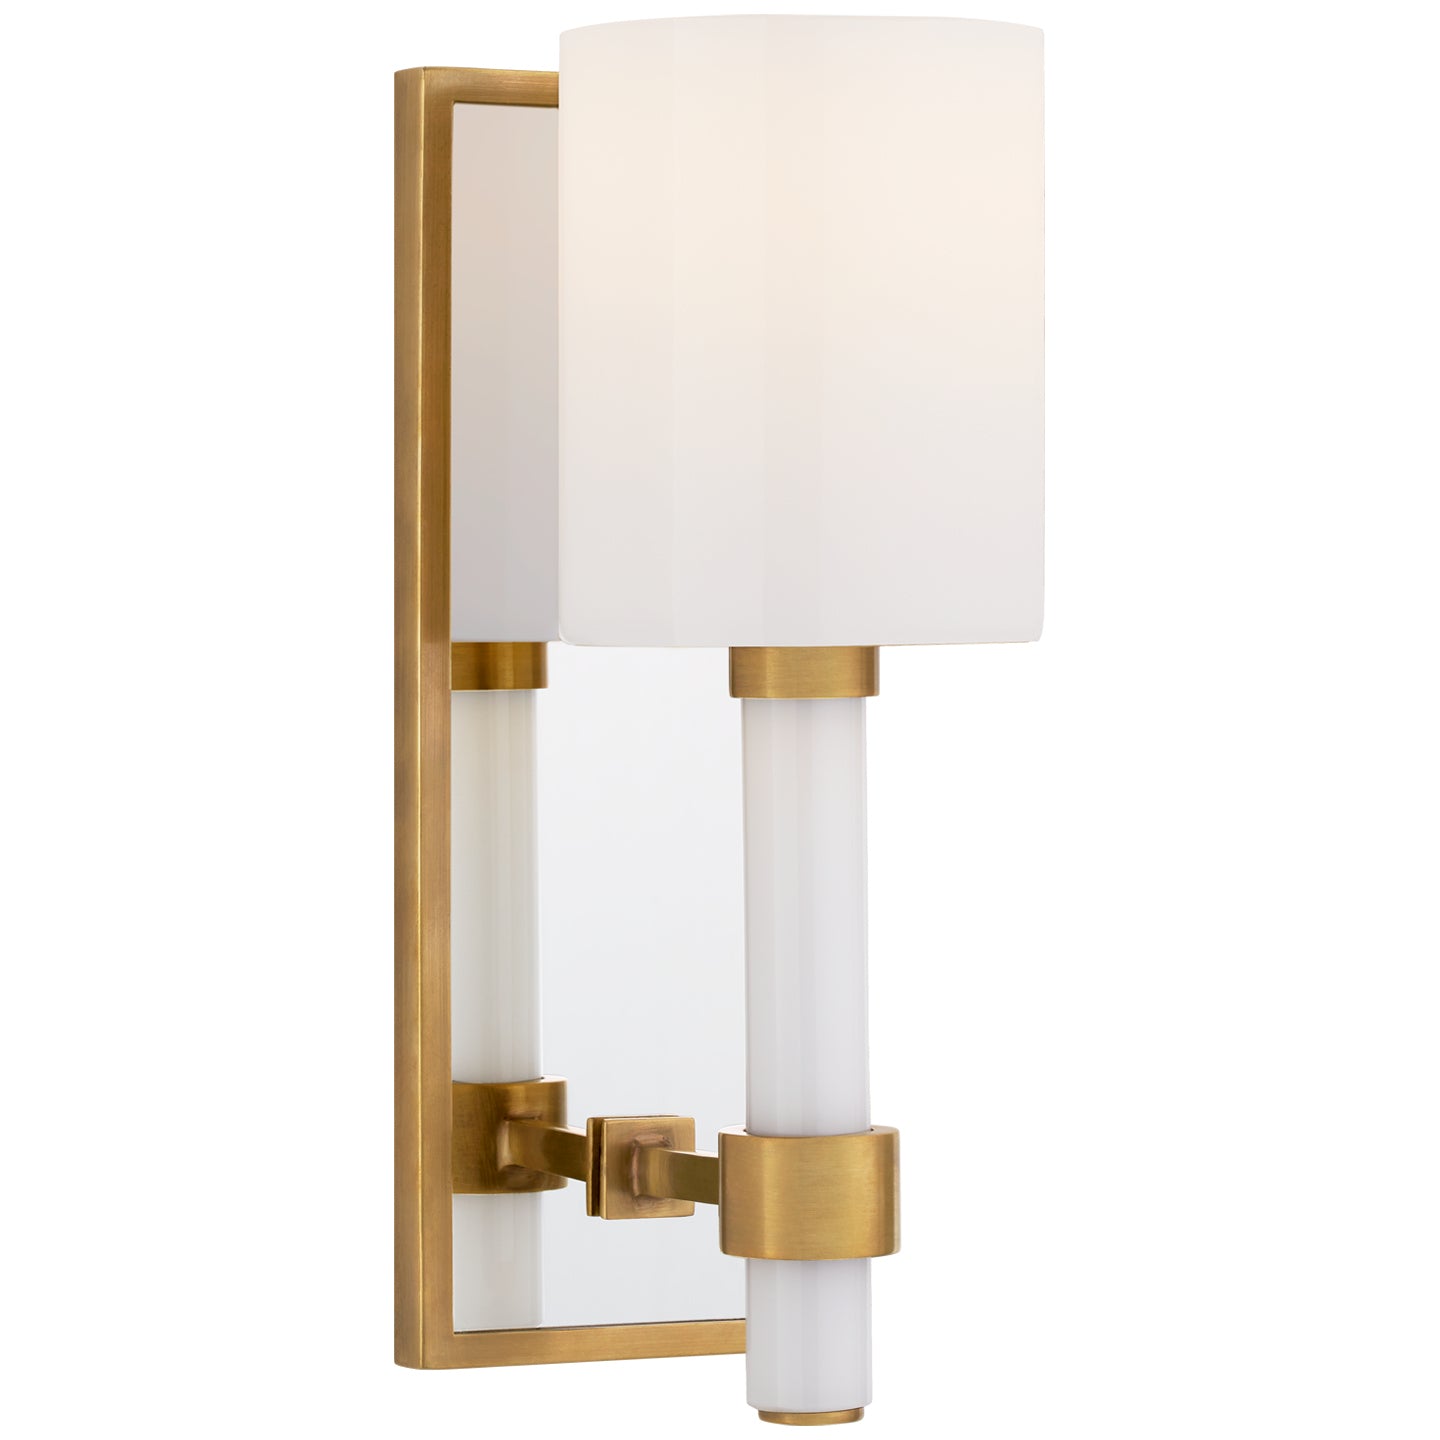 Visual Comfort Signature - SK 2450HAB-WG - One Light Wall Sconce - Maribelle - Hand-Rubbed Antique Brass